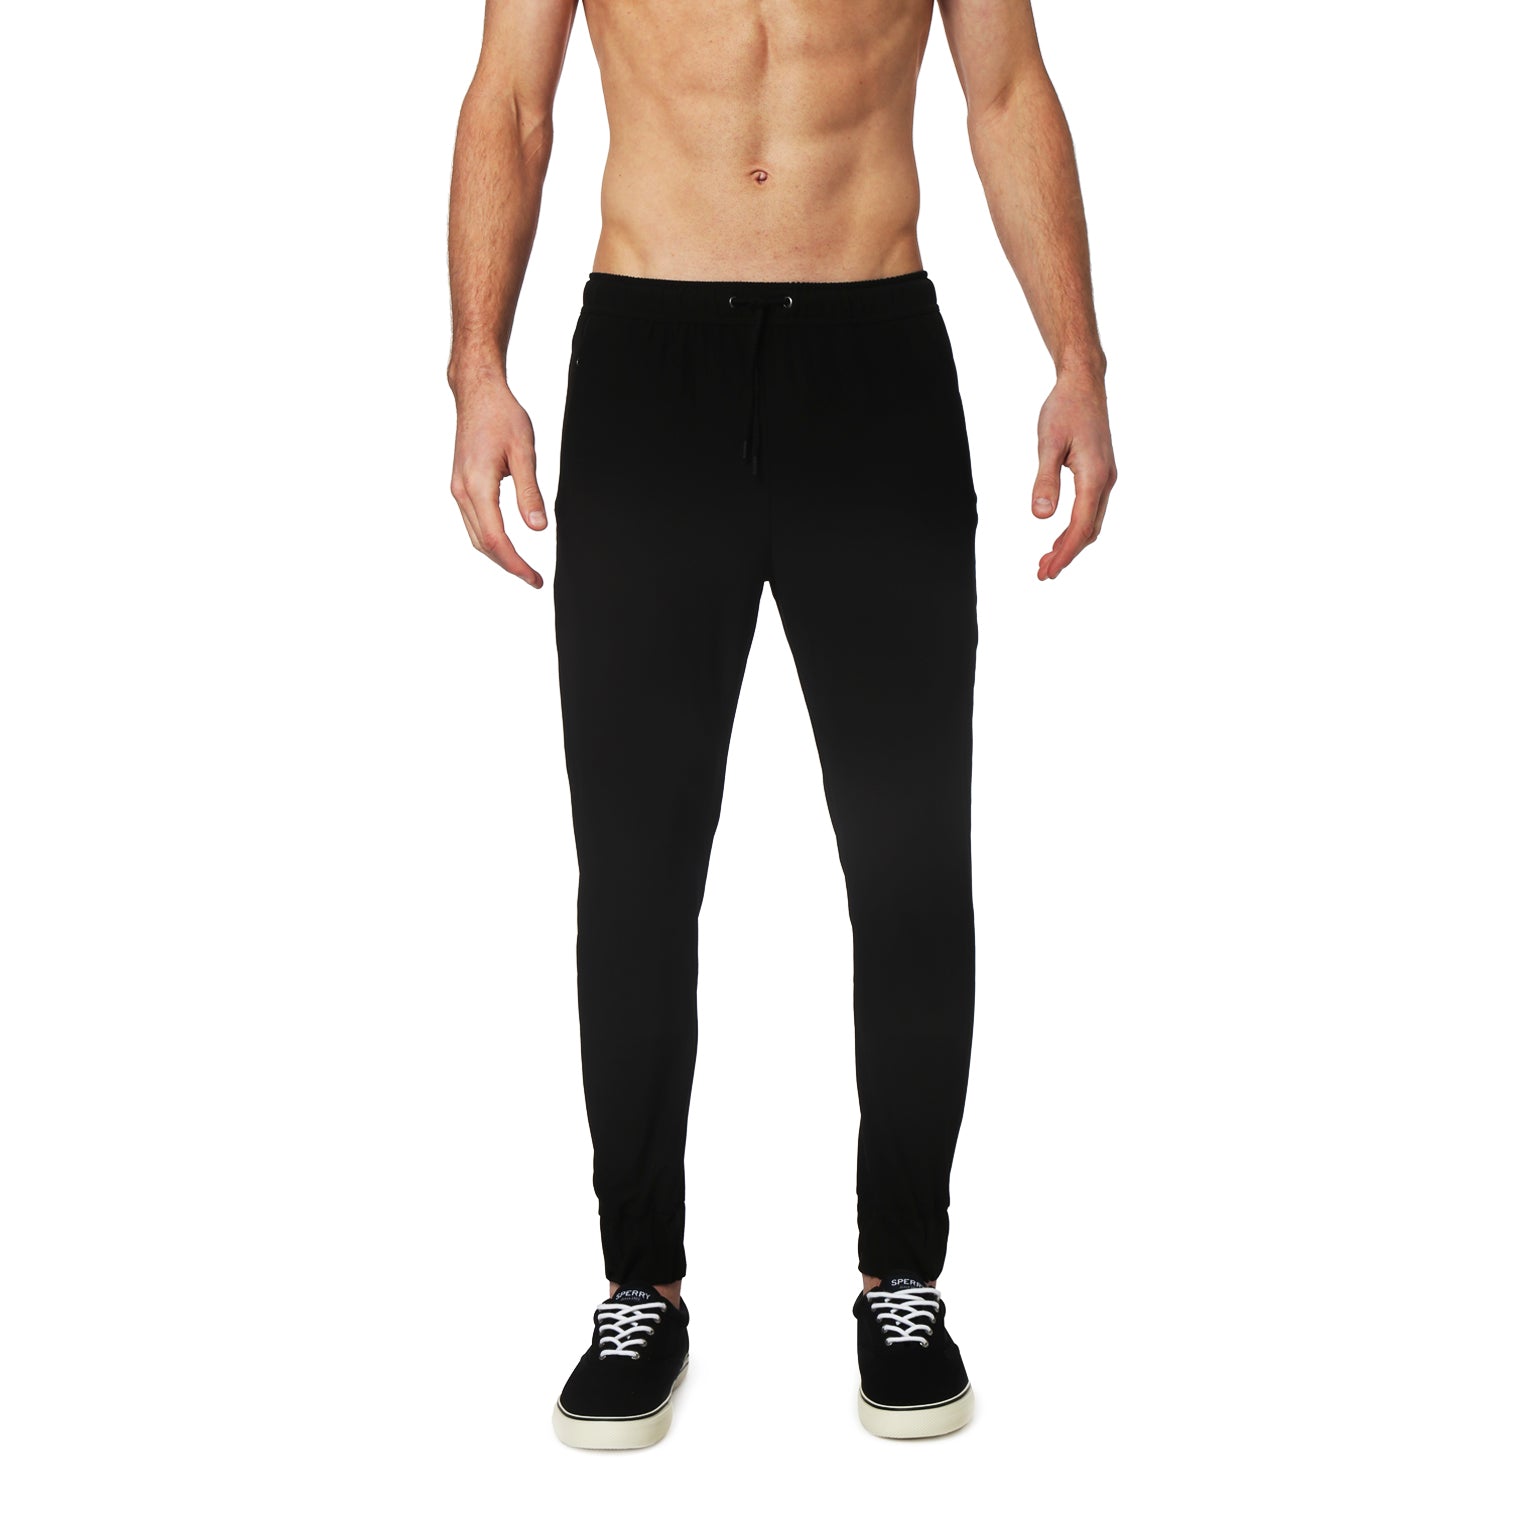 SAVE 70%- ACTIONWEAR- Black Solid Heather Stretch Lounge Pants